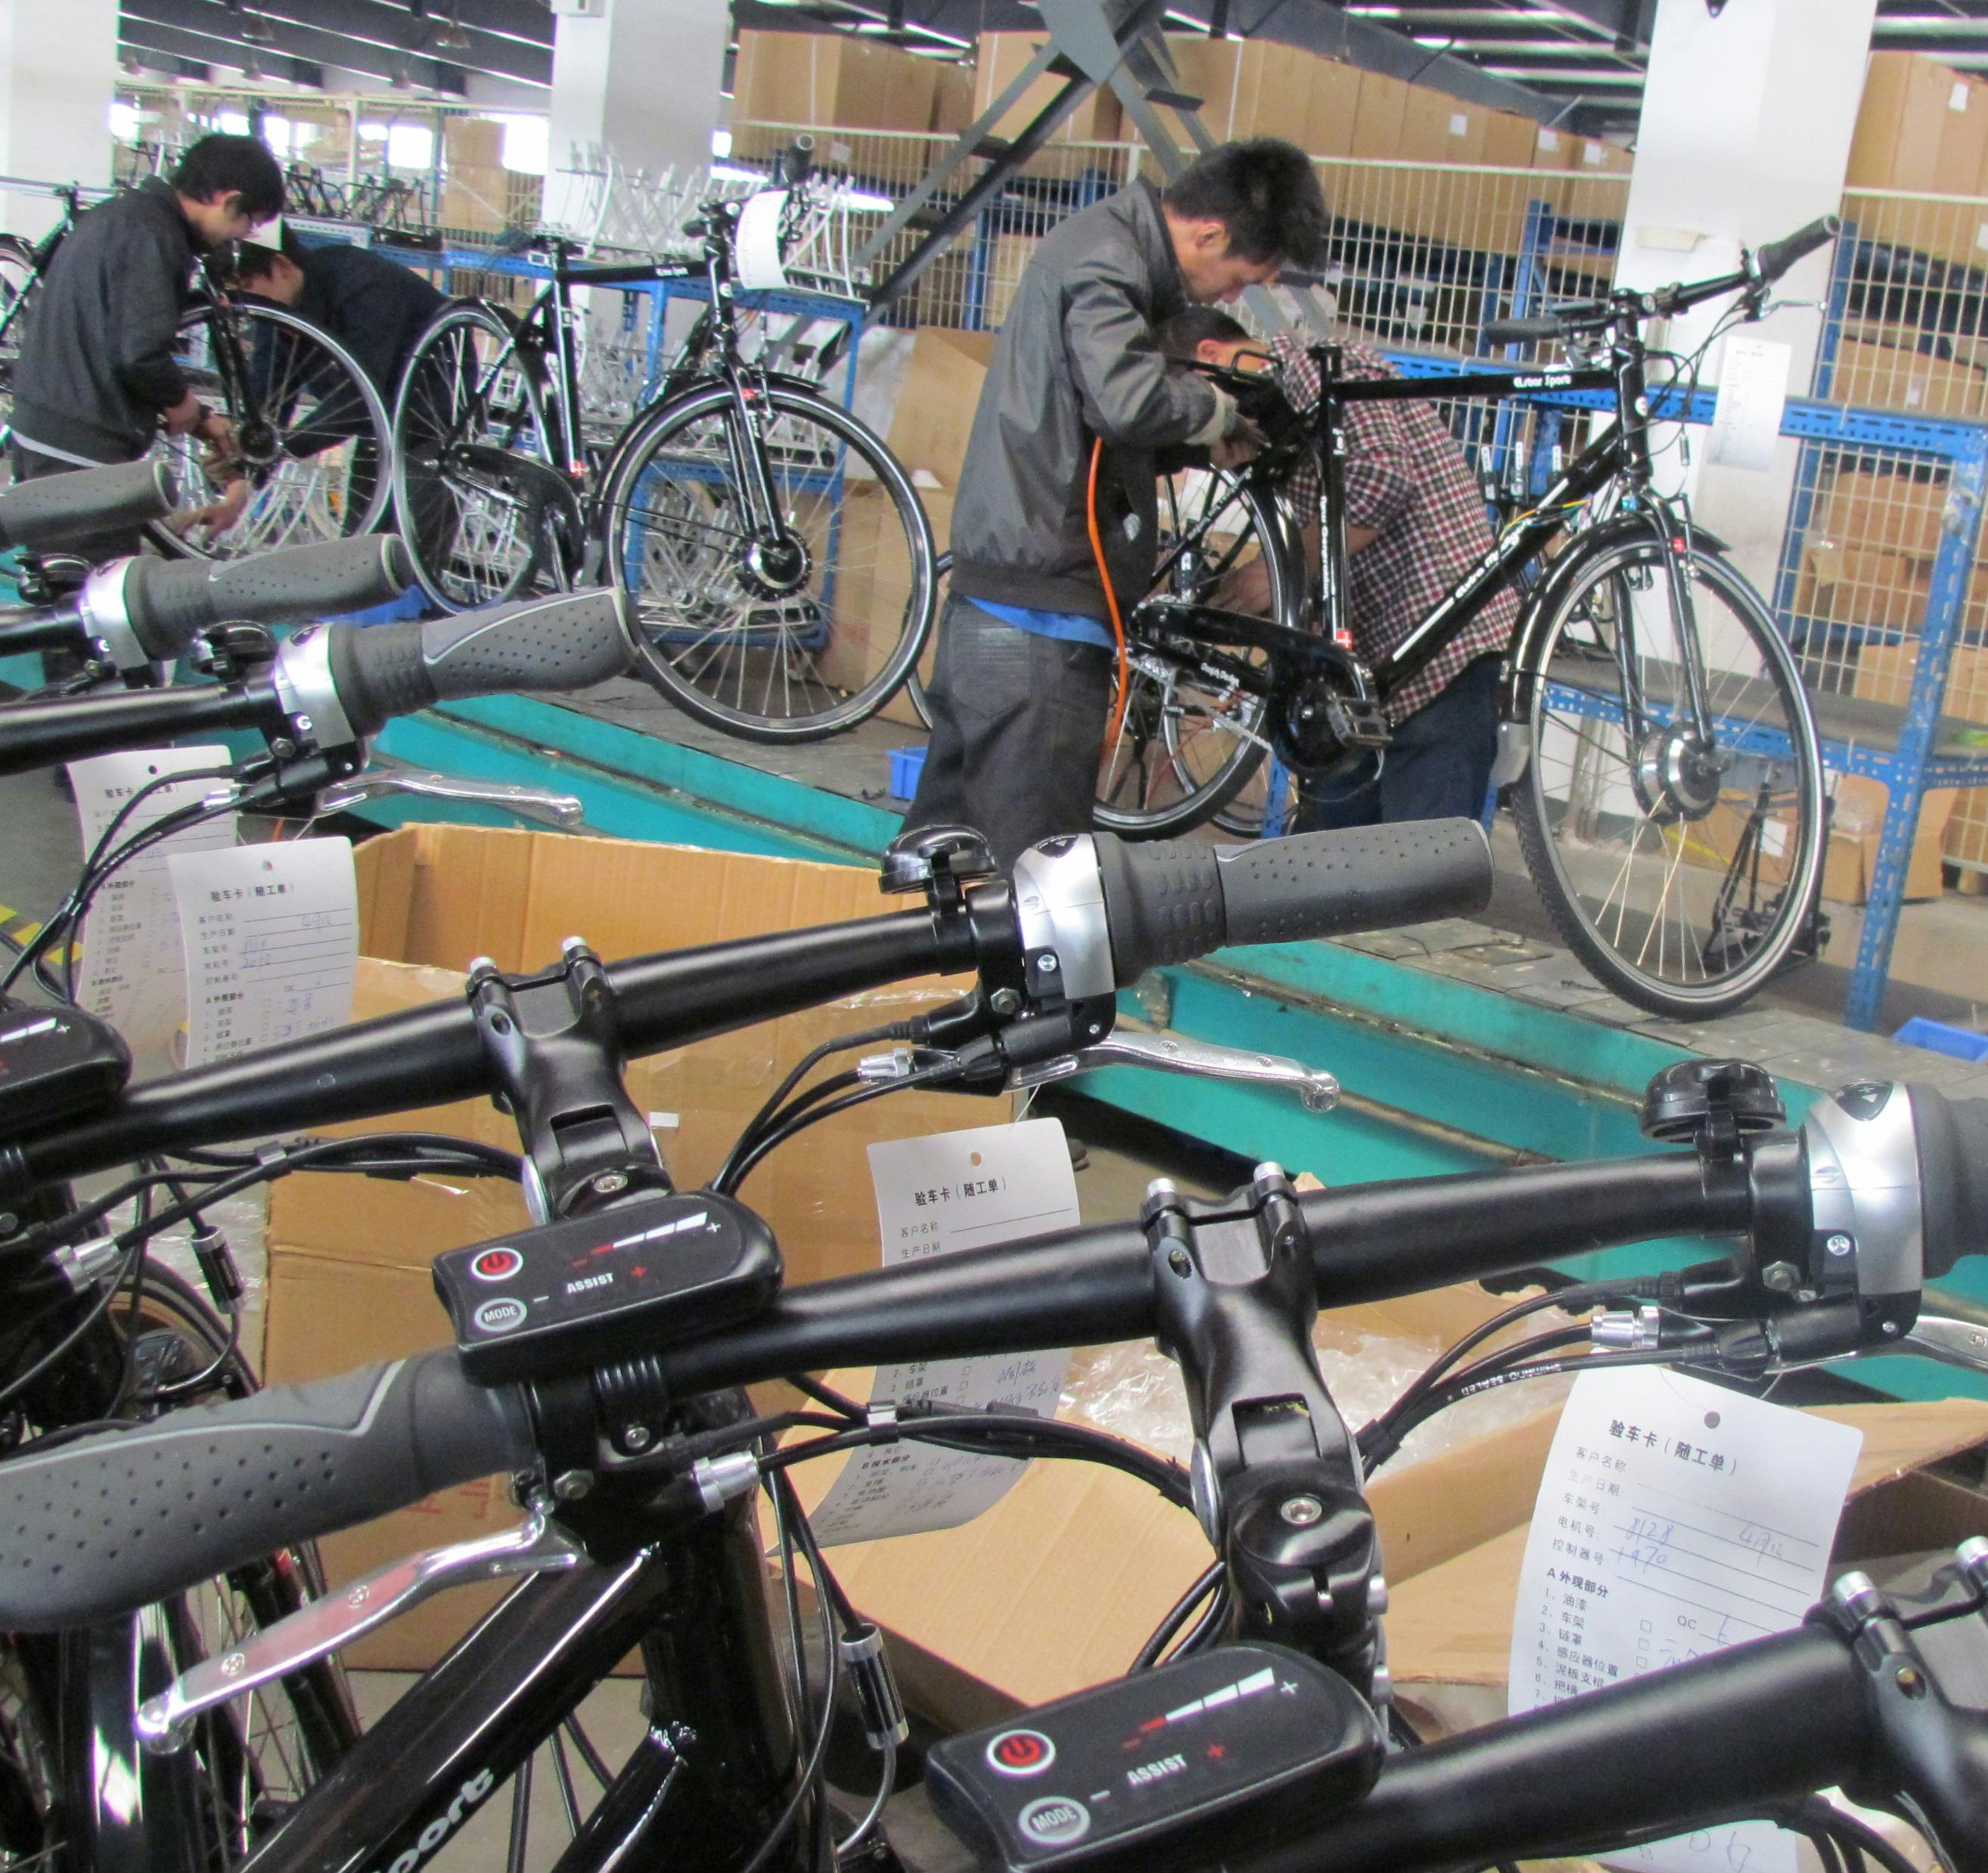 In the first eight month of 2015 e-bike import into the European Union grew by 26.5%. – Photo Bike Europe